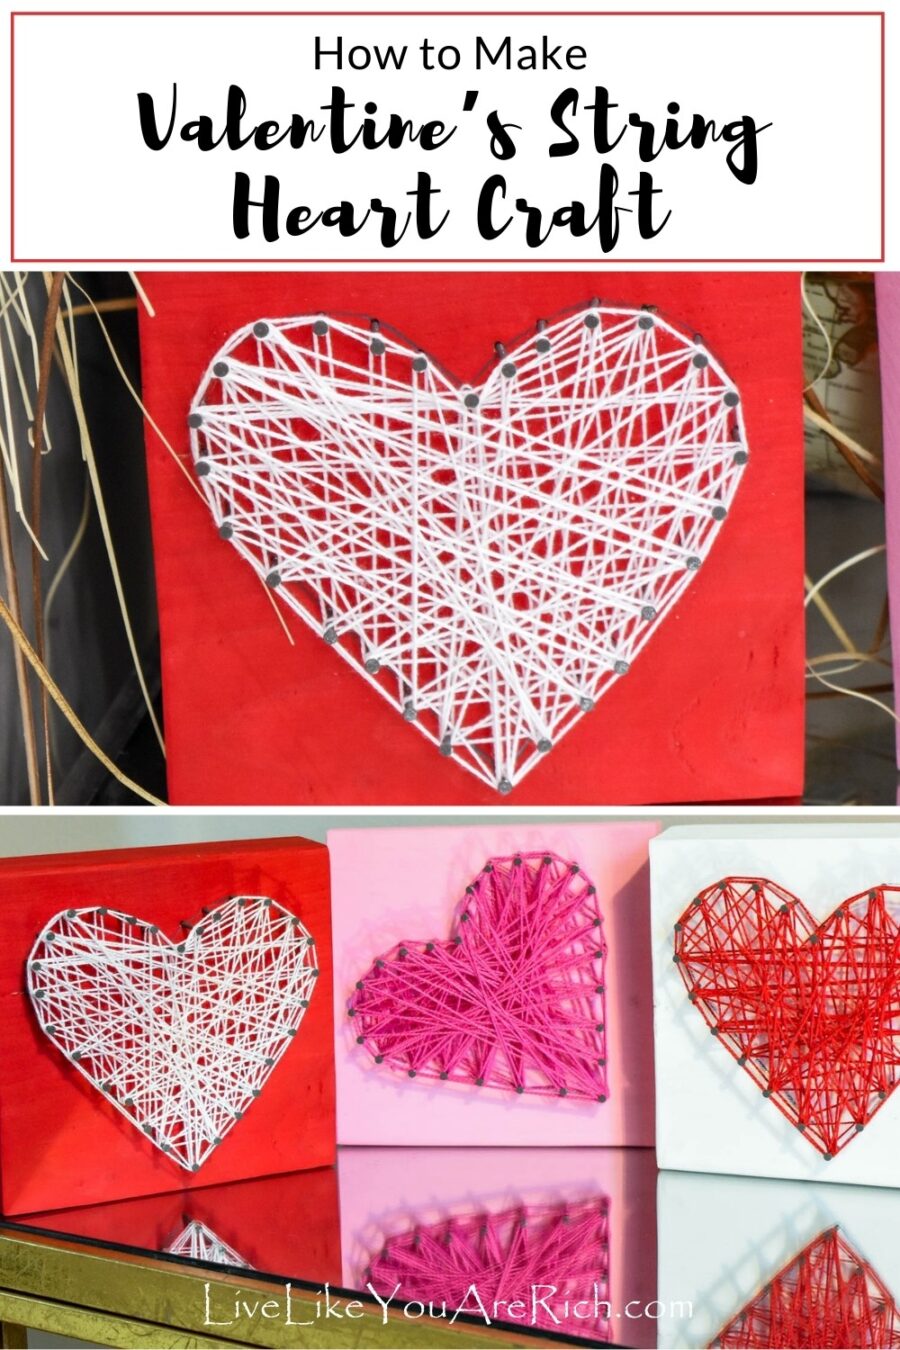 Easy, inexpensive, and fun Valentine's craft. These Valentine's String Heart Crafts were simple, inexpensive and are fun to make with kids.